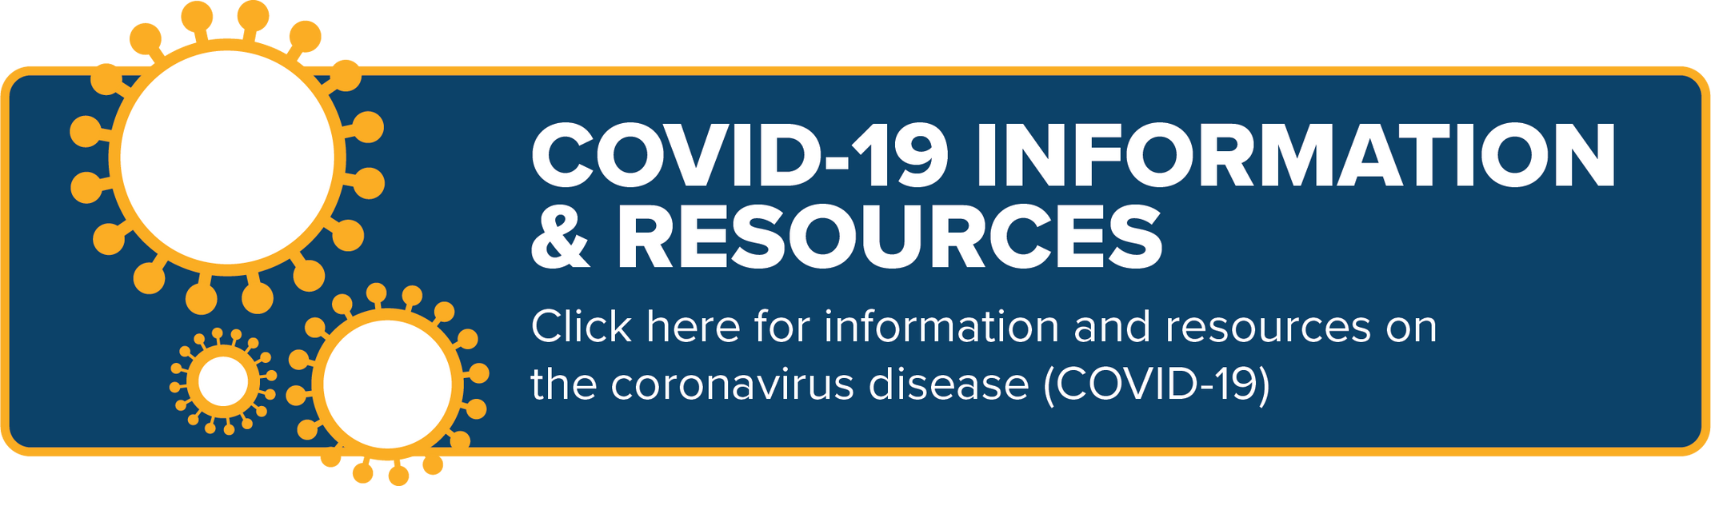 Click here for information and resources on the coronavirus disease (COVID-19)